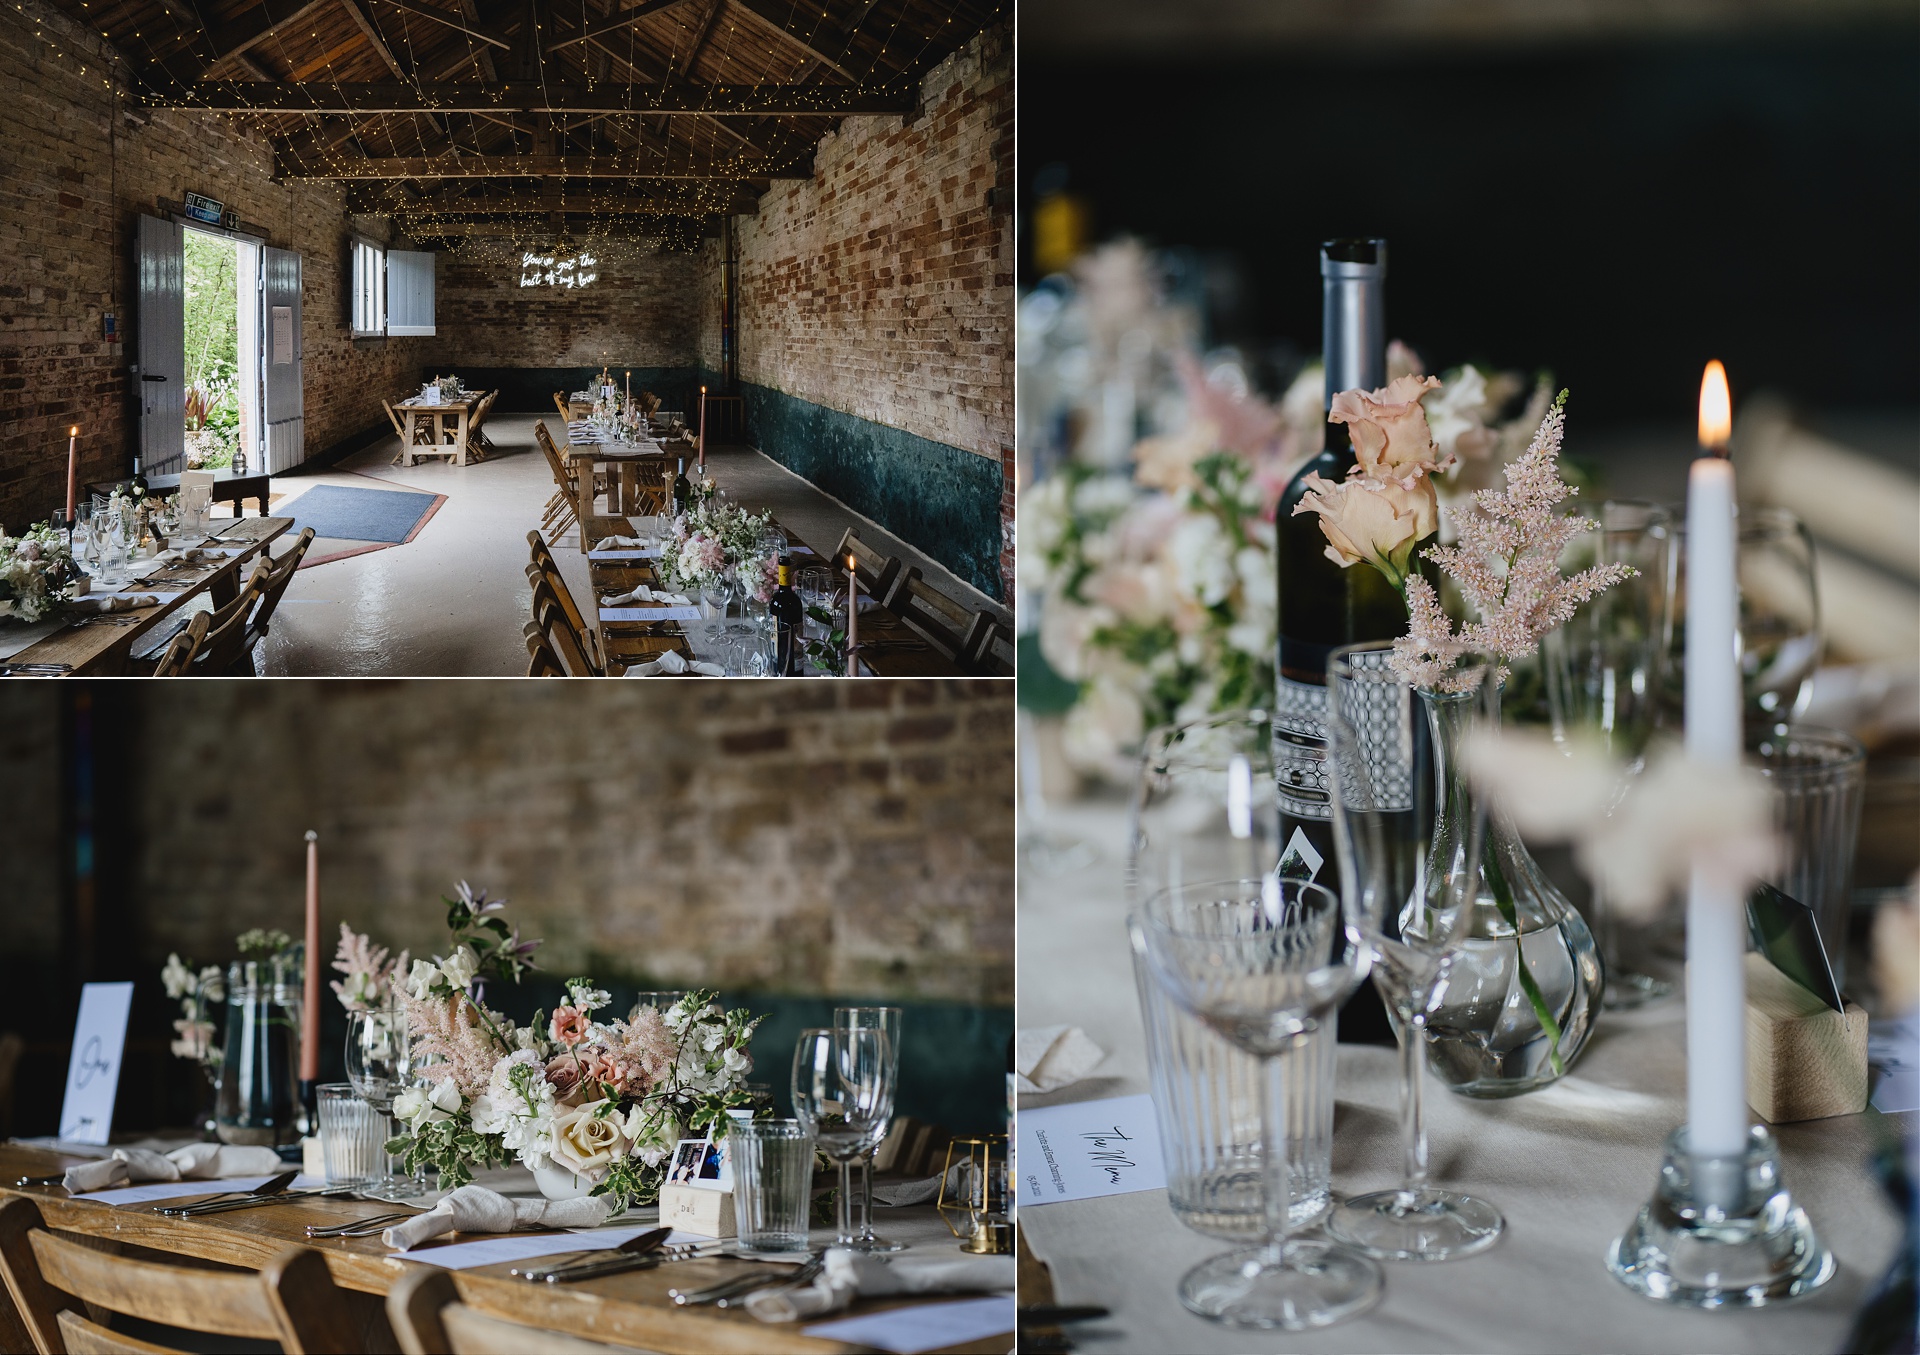 Beautiful wedding tables set with pale pink and white flowers, in a rustic barn setting at Cadhay in Devon 